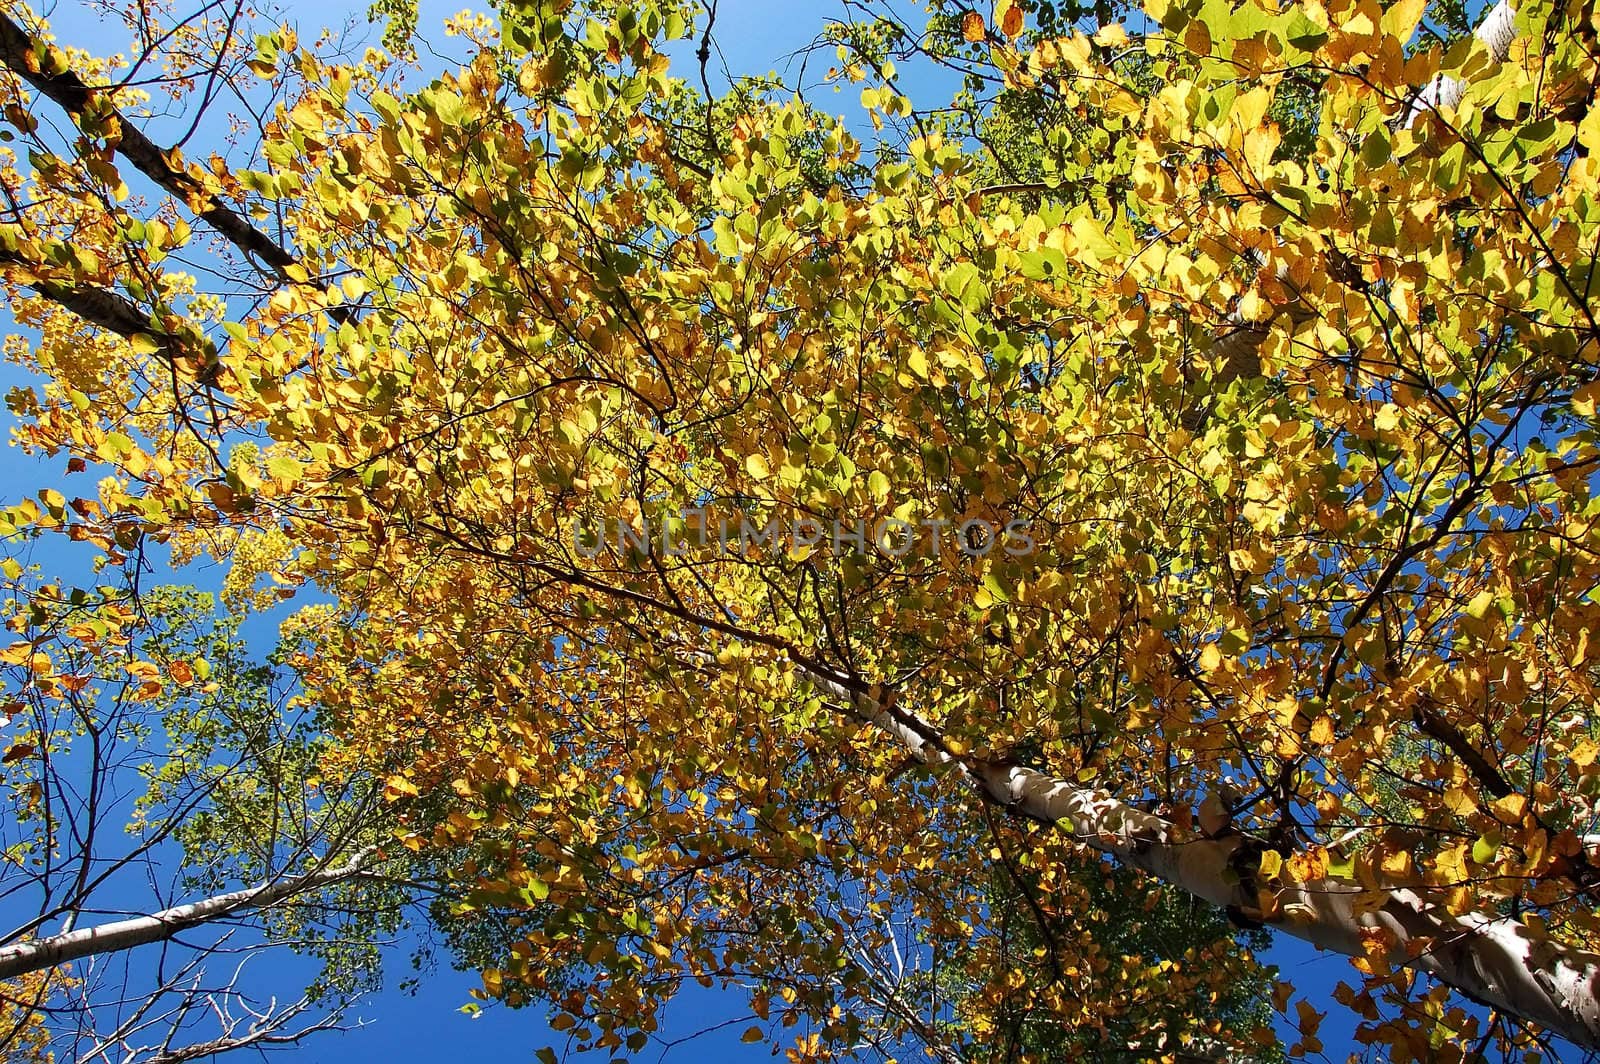 Picture looking up of a tree with it's autumn's foliage